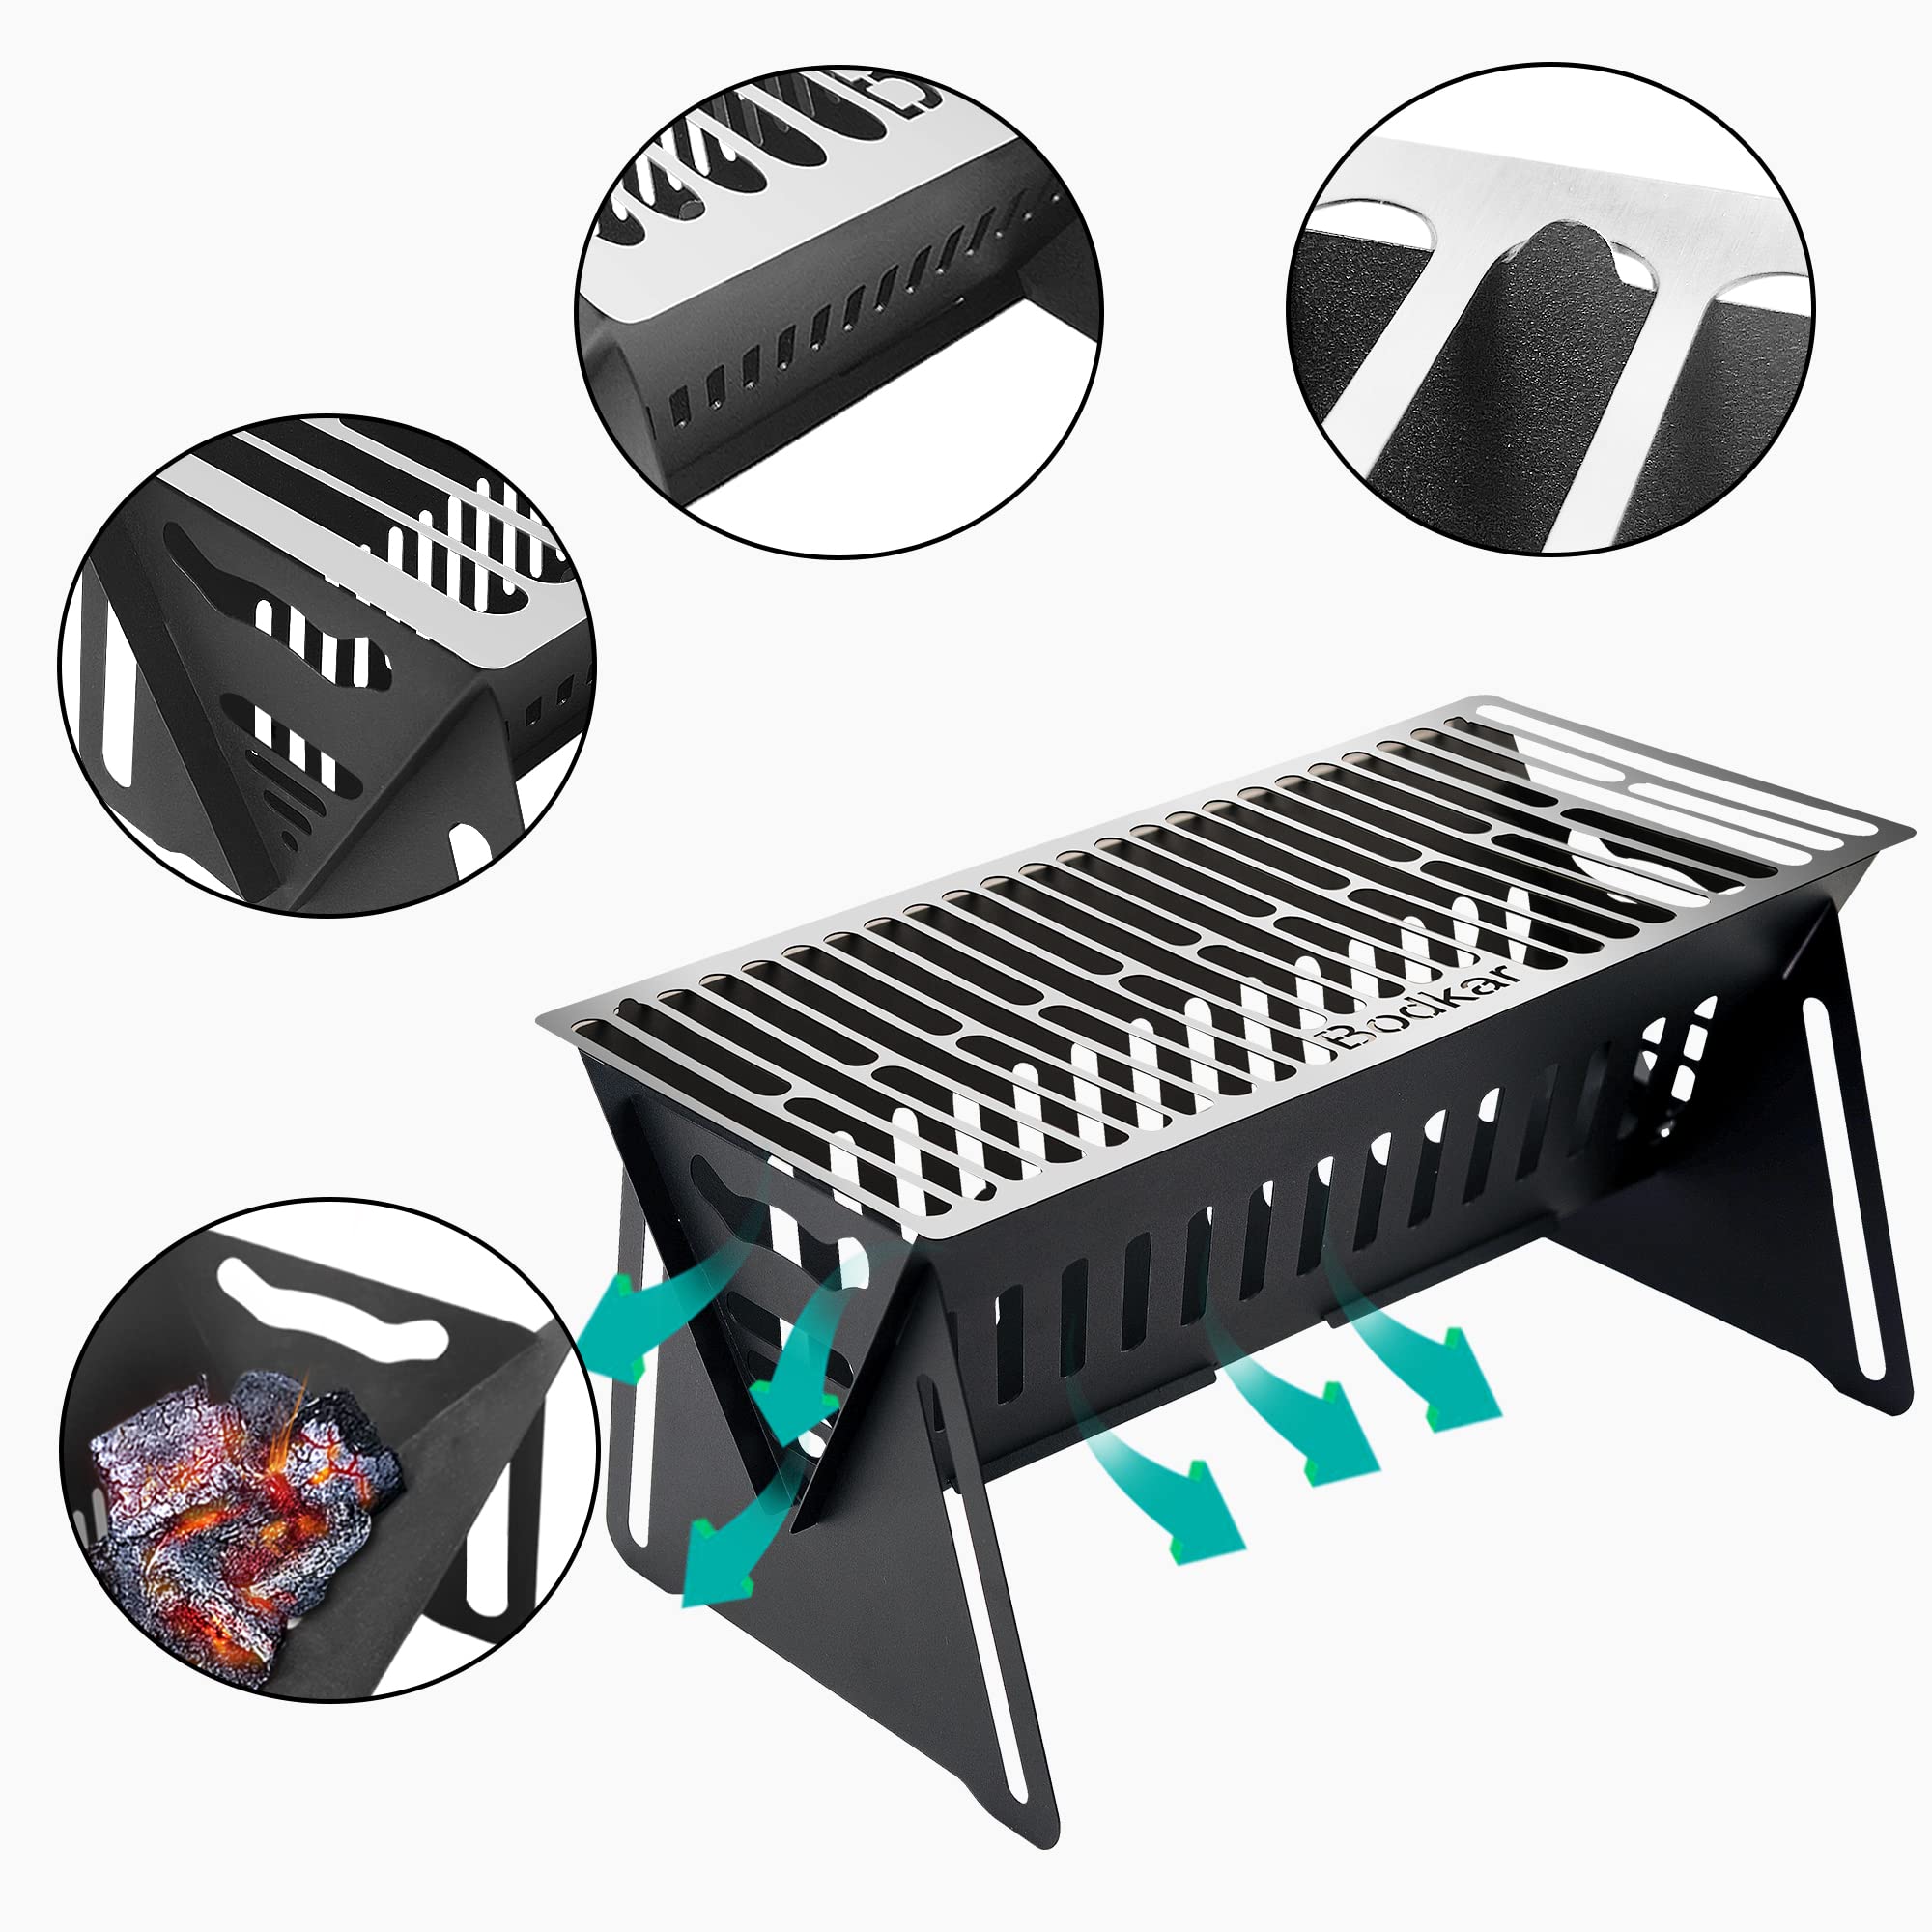 Bodkar Small Portable Grill for Personal Use, Mini Charcoal Grill for Tabletop Indoor Outdoor Cooking BBQ Camping Picnic Patio Backyard